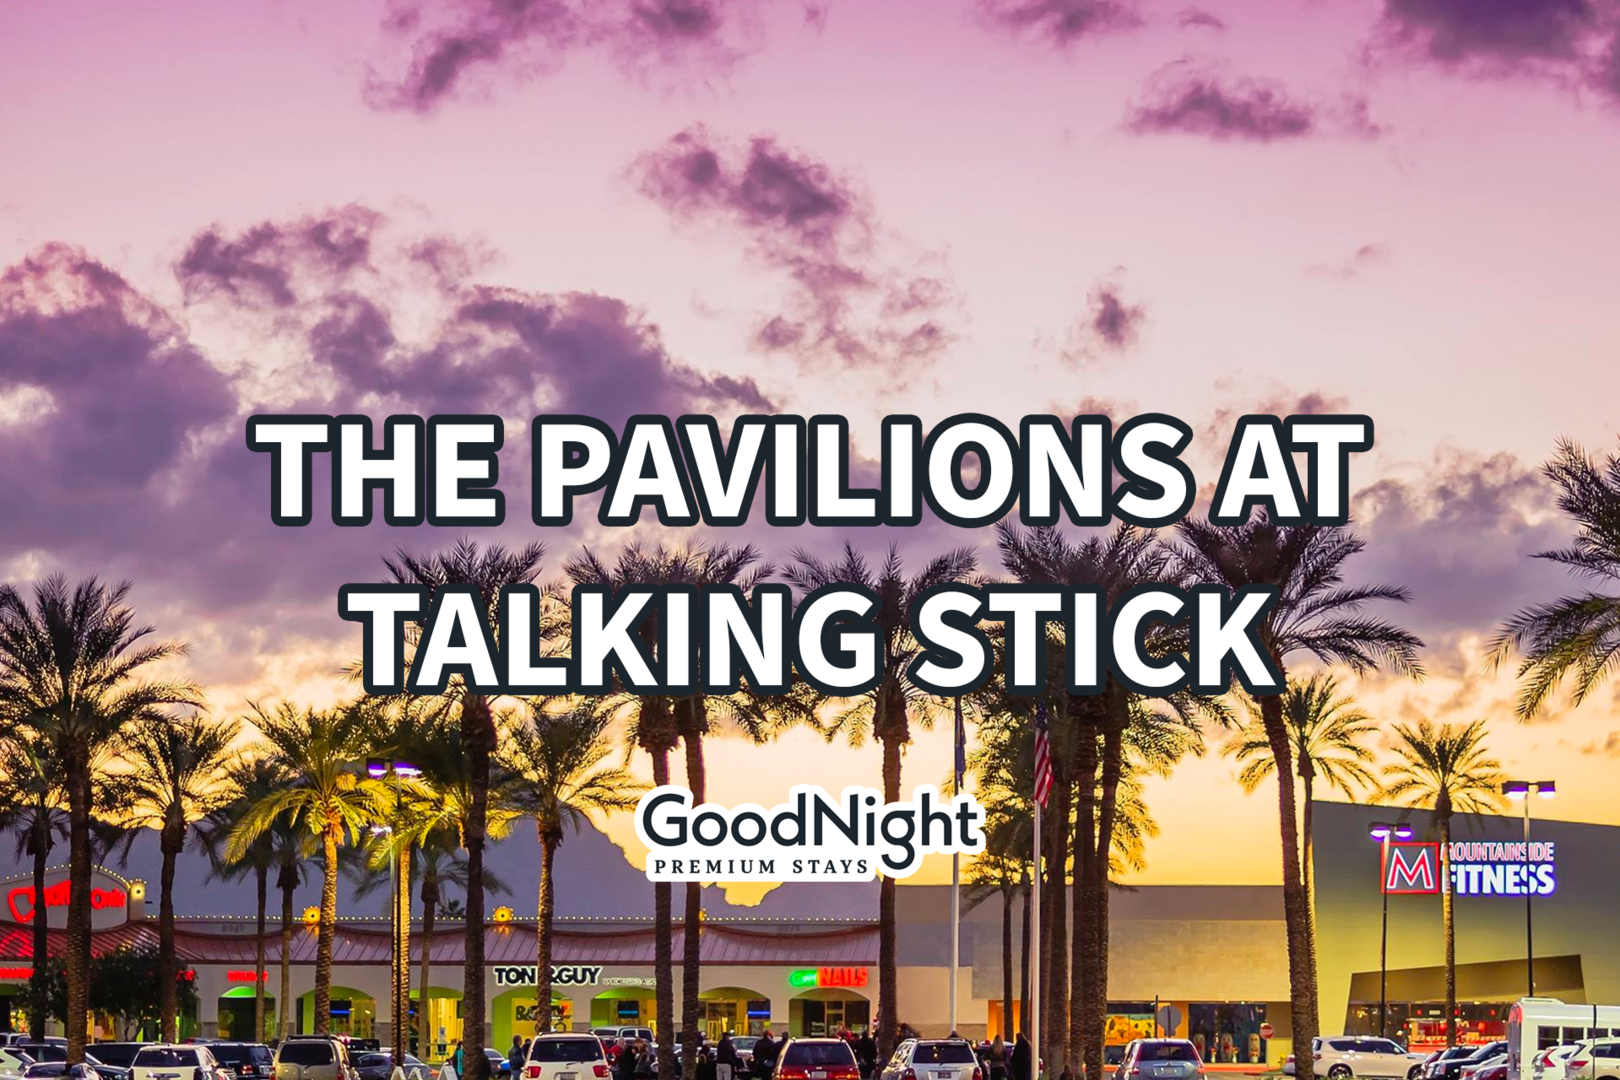 24 min to The Pavilions at Talking Stick